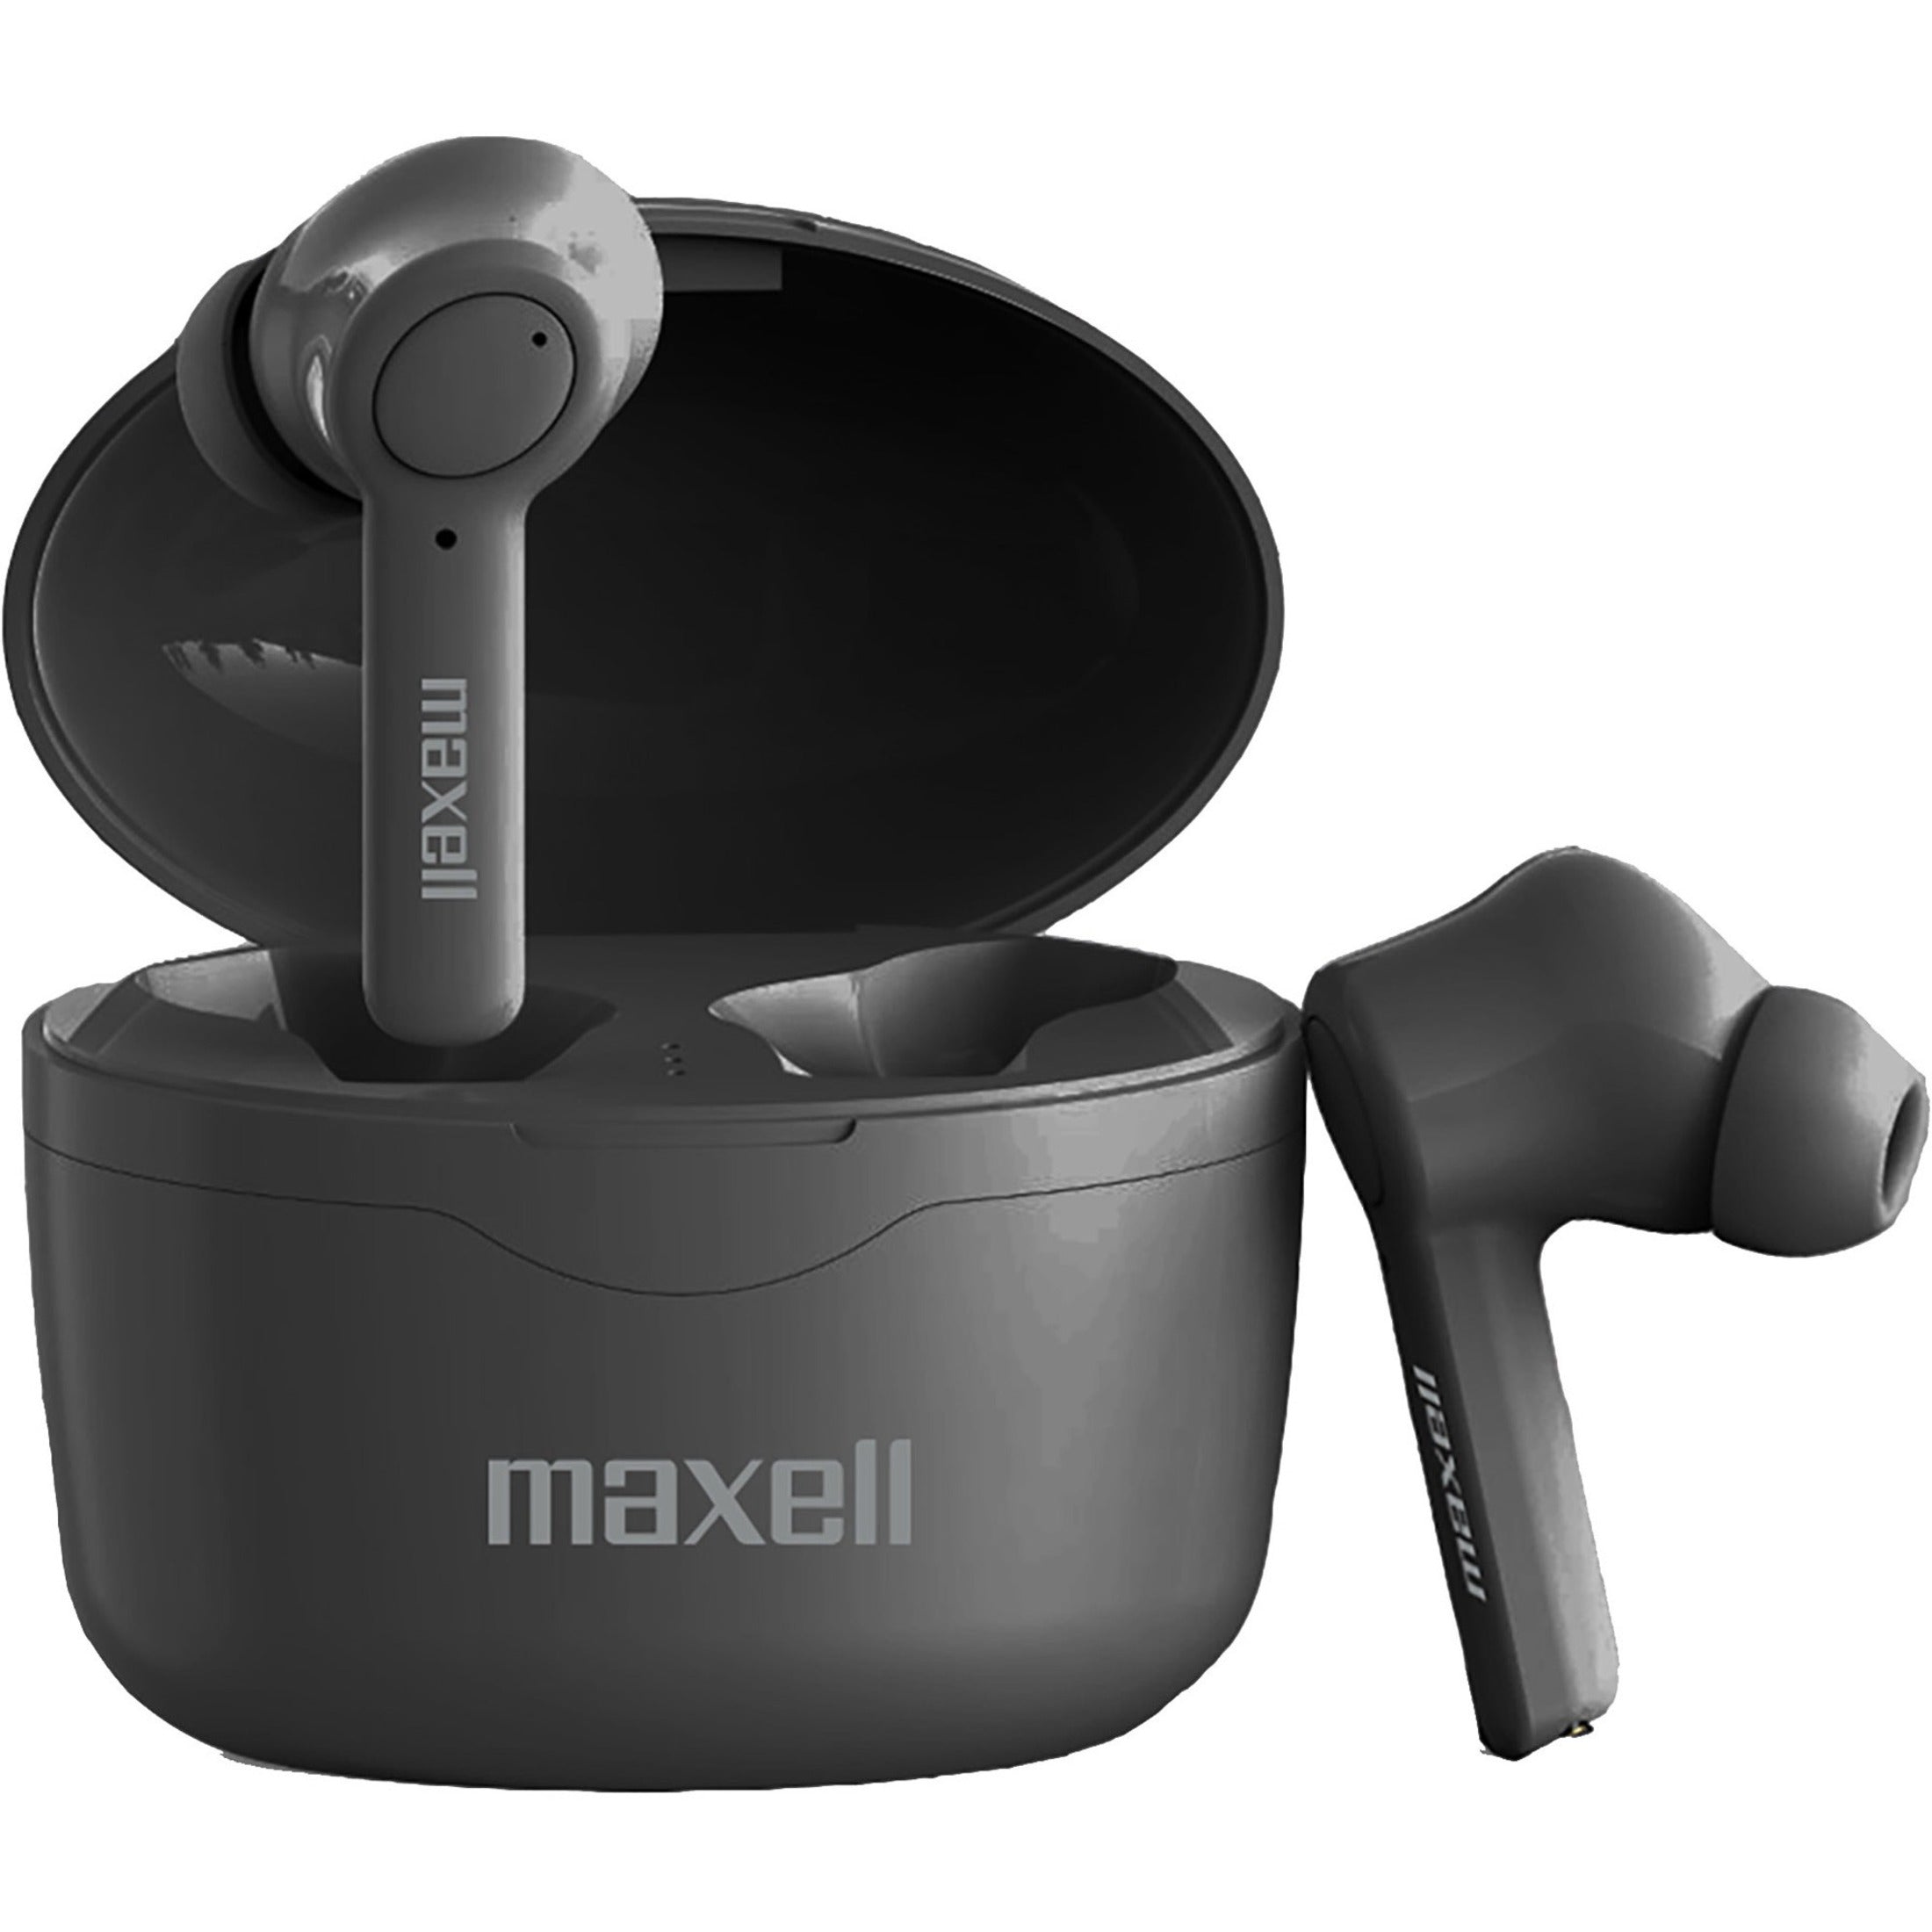 Maxell 199899 Sync Up True Wireless Bluetooth Earbuds Secure Fit Charging Case Black